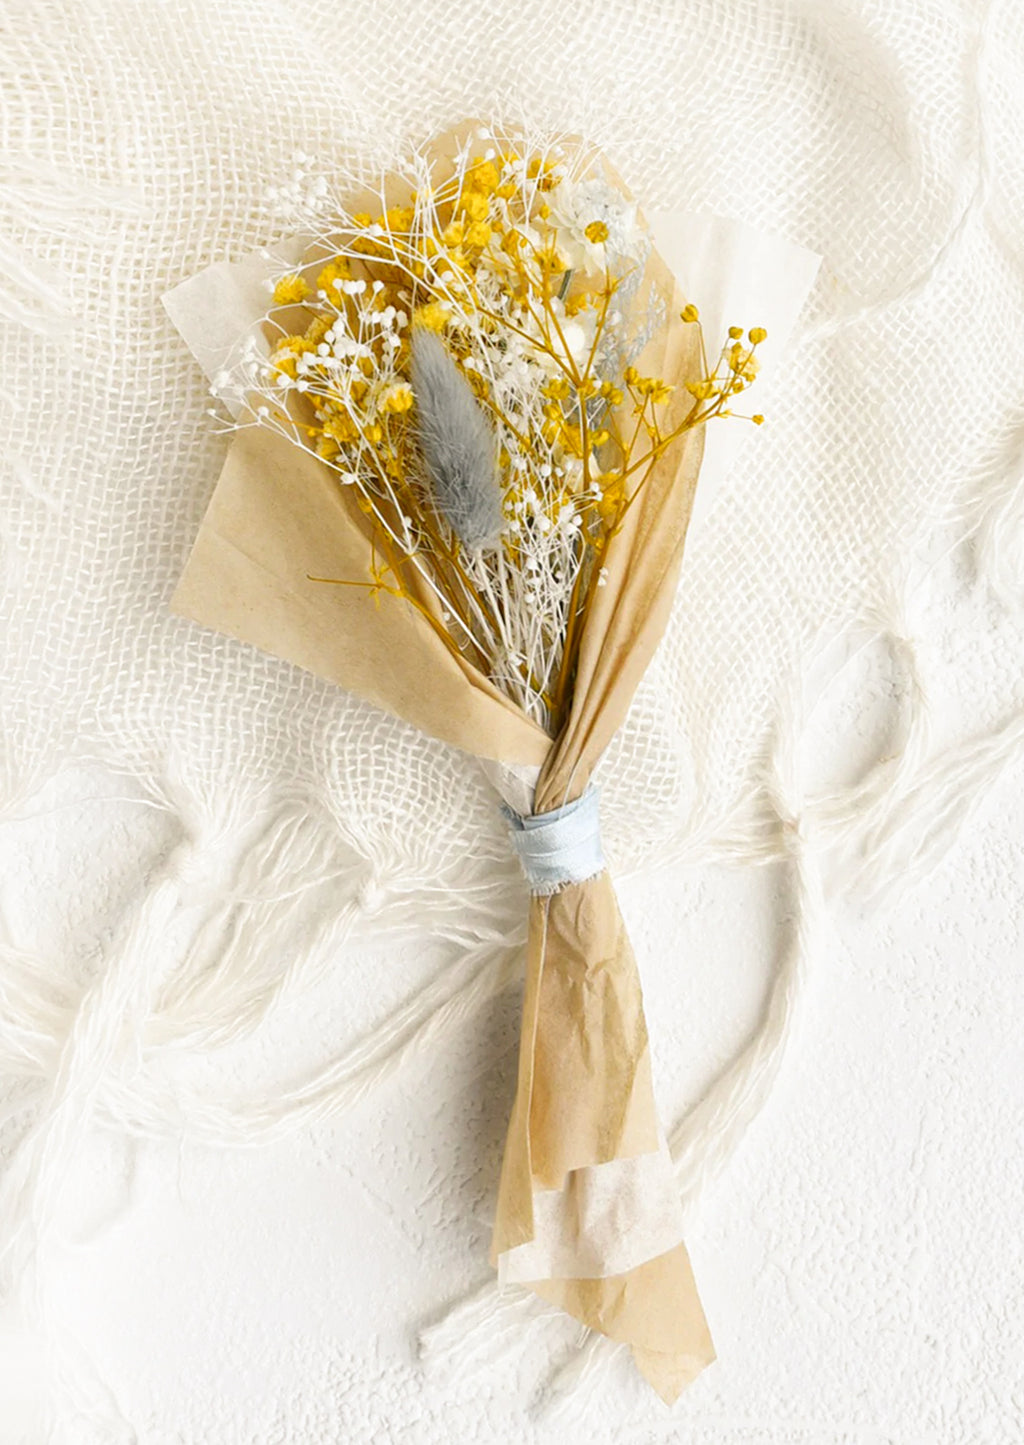 Mini: A small bouquet of dried yellow, white and light blue flowers wrapped in parchment paper